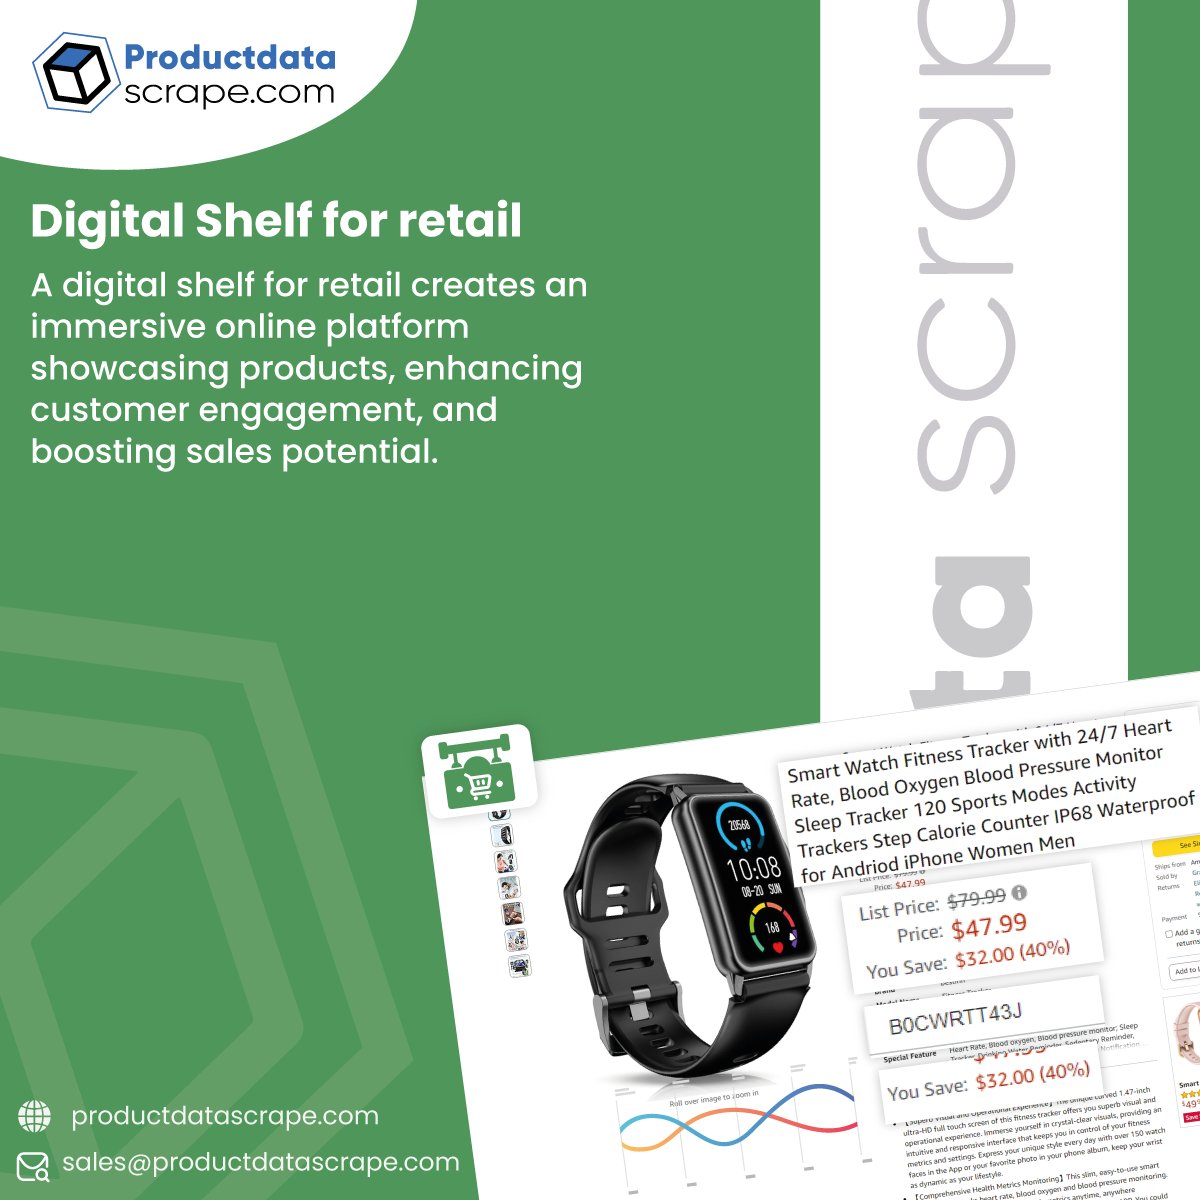 Track and optimize your ecommerce product performance using #DigitalShelfAnalytics solutions. Our solutions are available in the USA, UK, Canada, Australia, etc.

Know More:productdatascrape.com/digital-shelf-…

#DigitalShelfForRetail #DigitalShelfOptimization 
 #DigitalShelf  #Unitedstates